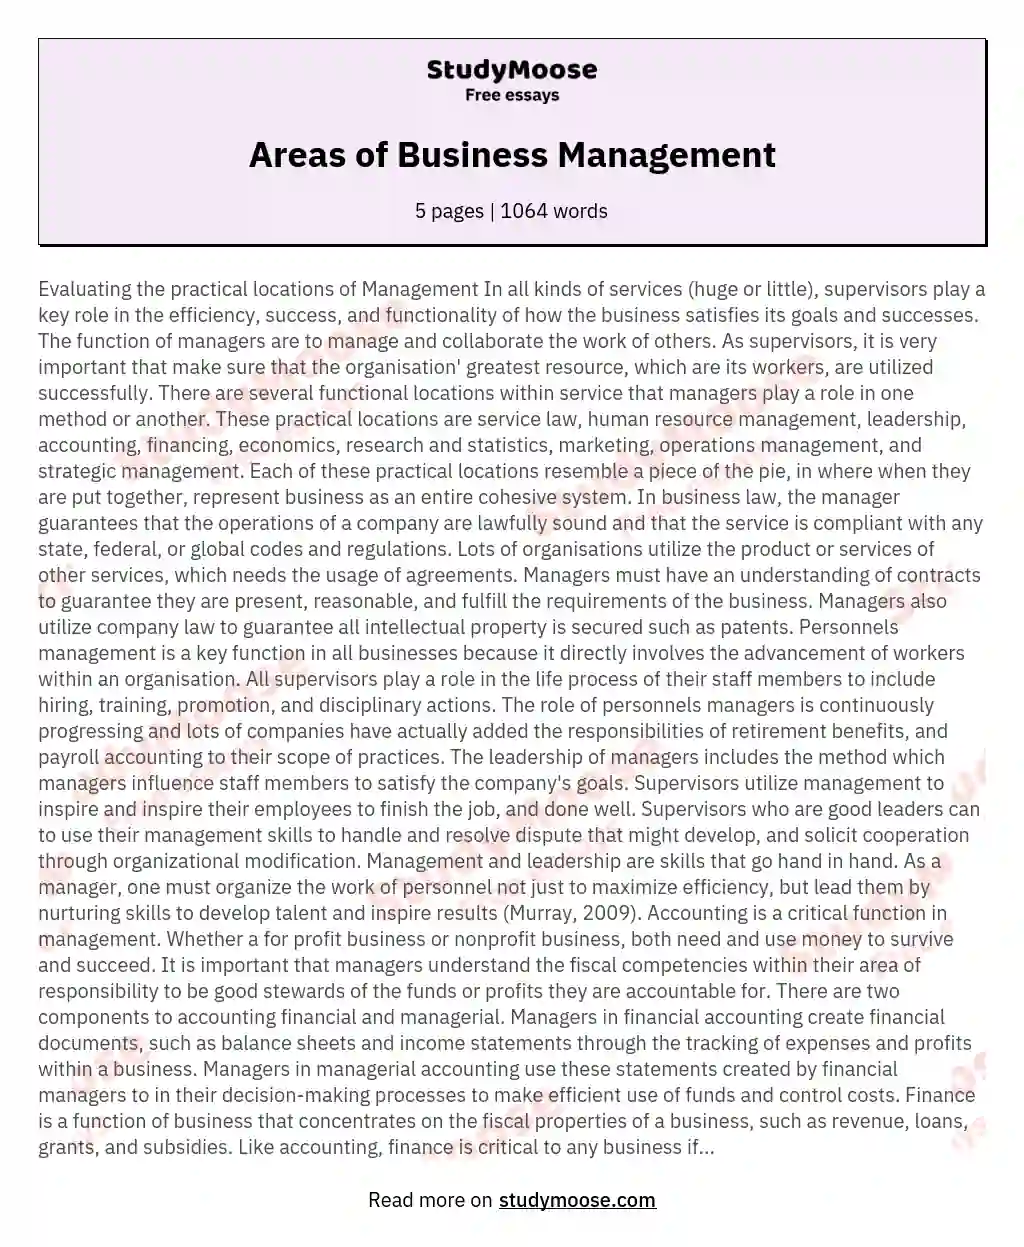 Areas of Business Management essay